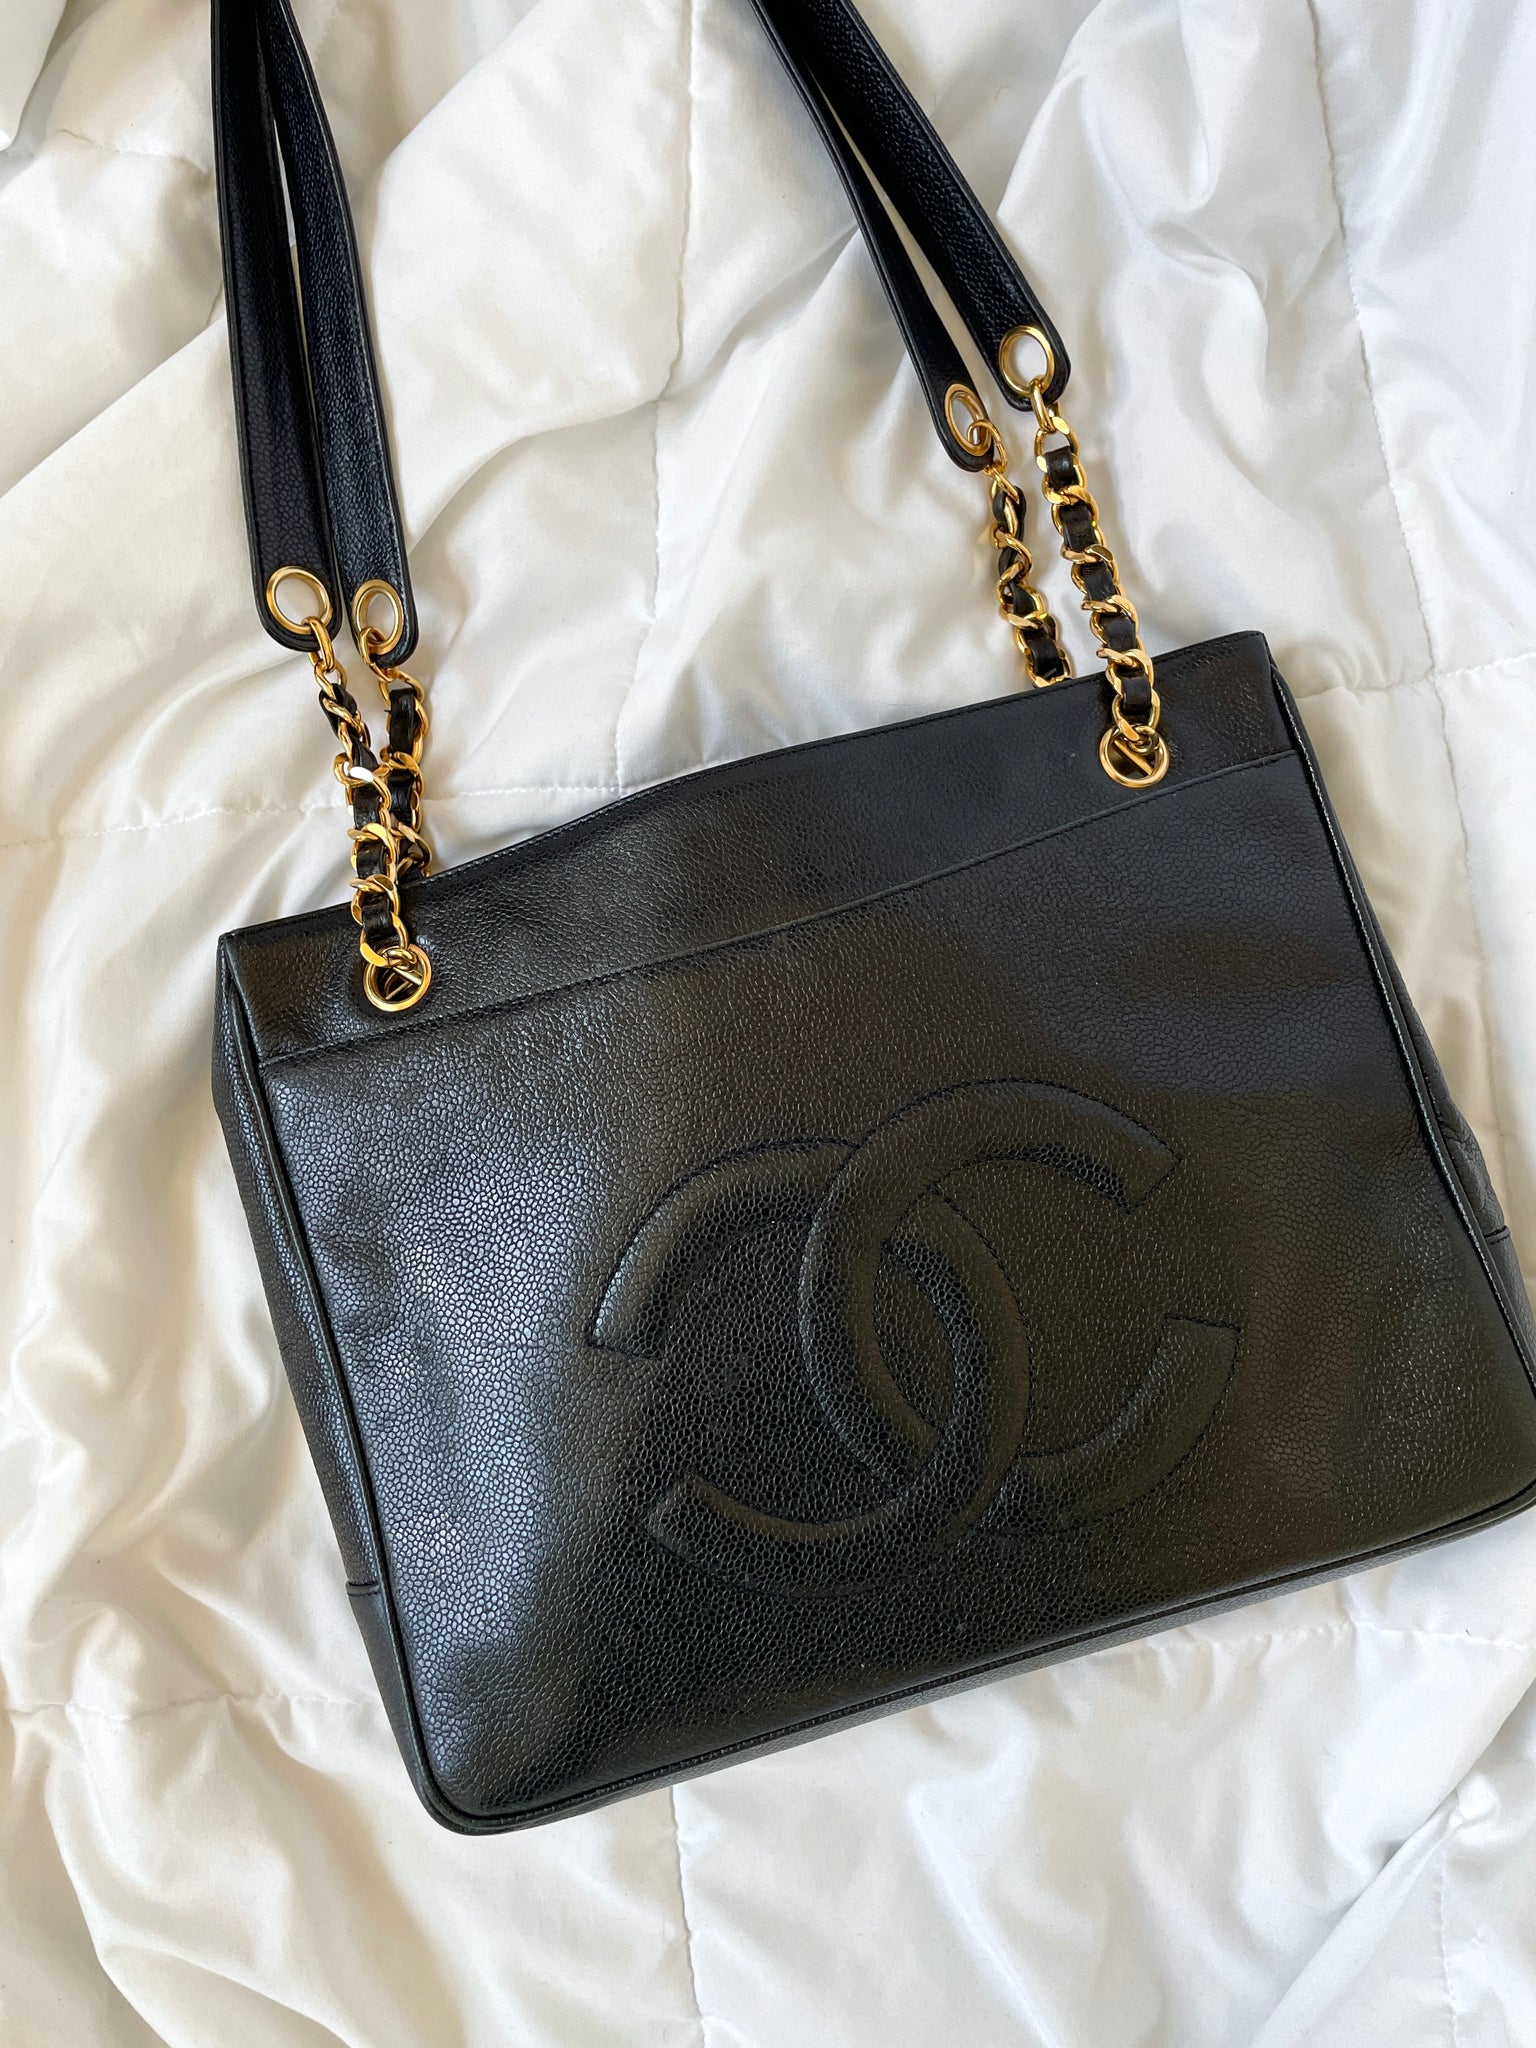 Chanel Vintage 90's Metallic Lambskin Mini Quilted Flap Gold Cross Body Bag